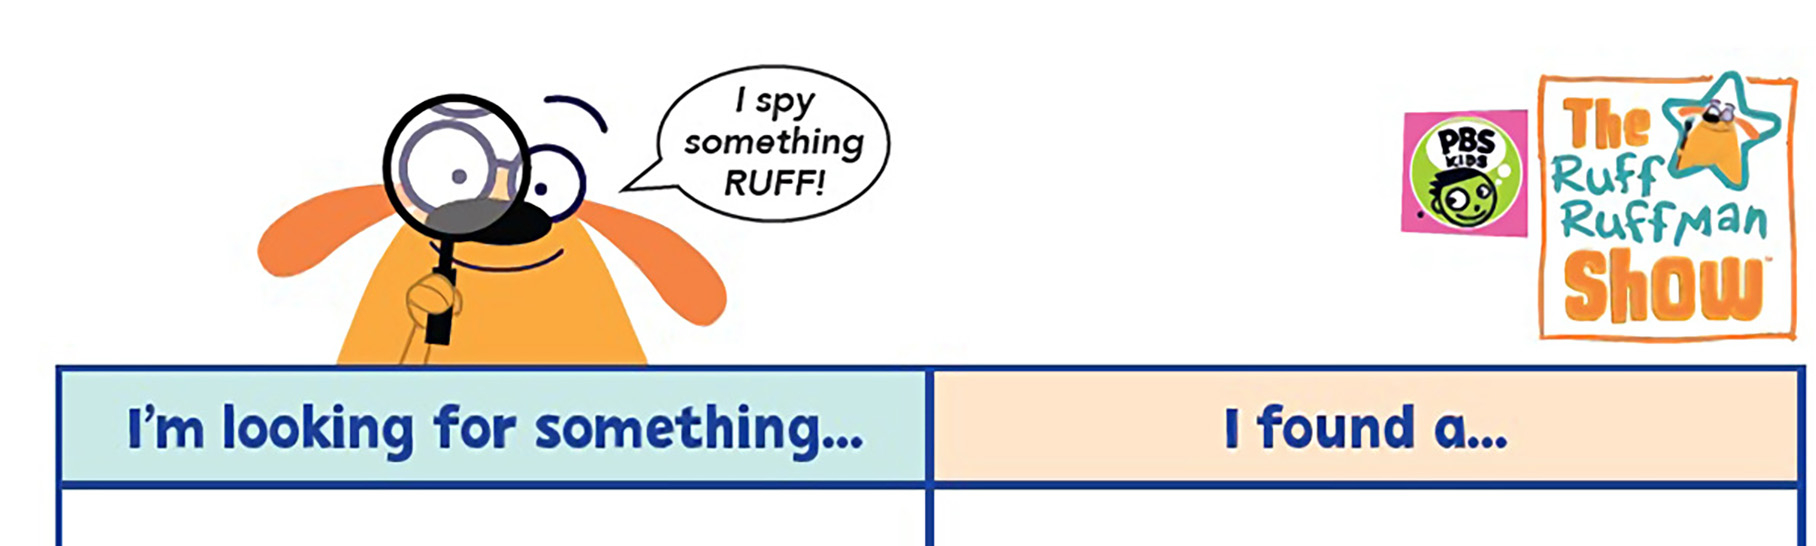 Ruff Ruffman peering over the top of a white piece of paper. The paper is divided into two columns. One column heading says “I’m looking for something…” and the other column heading says “I found a…” There is a speech bubble near Ruff’s head that says “I spy something RUFF!”